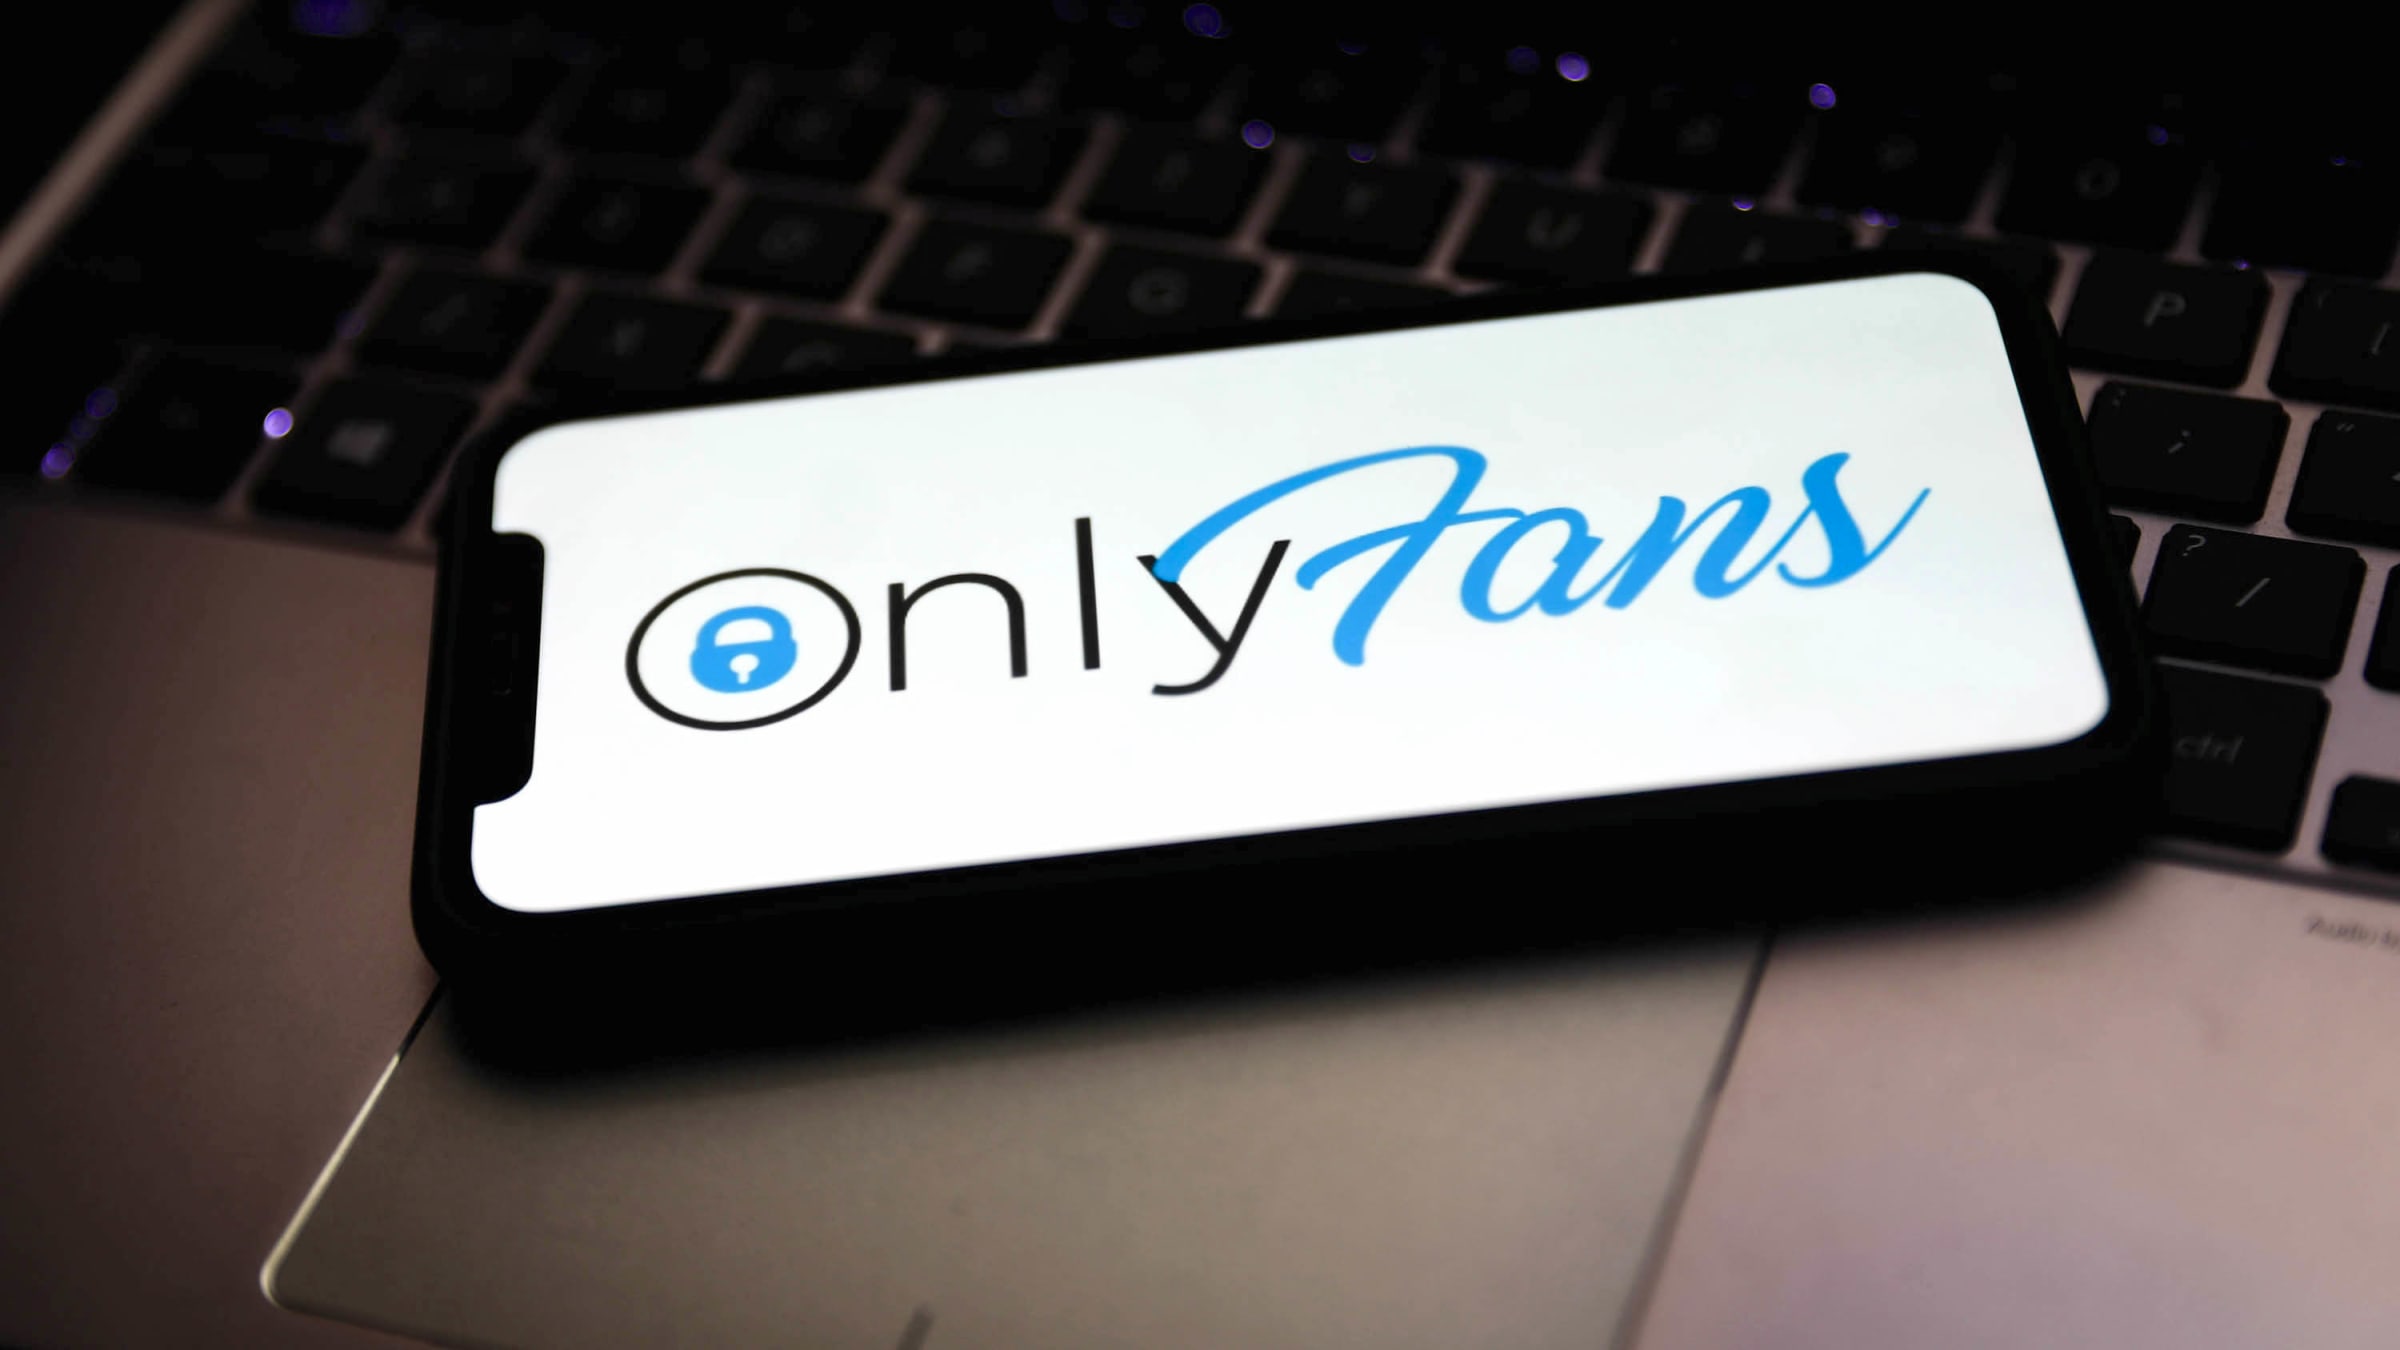 How to contact onlyfans